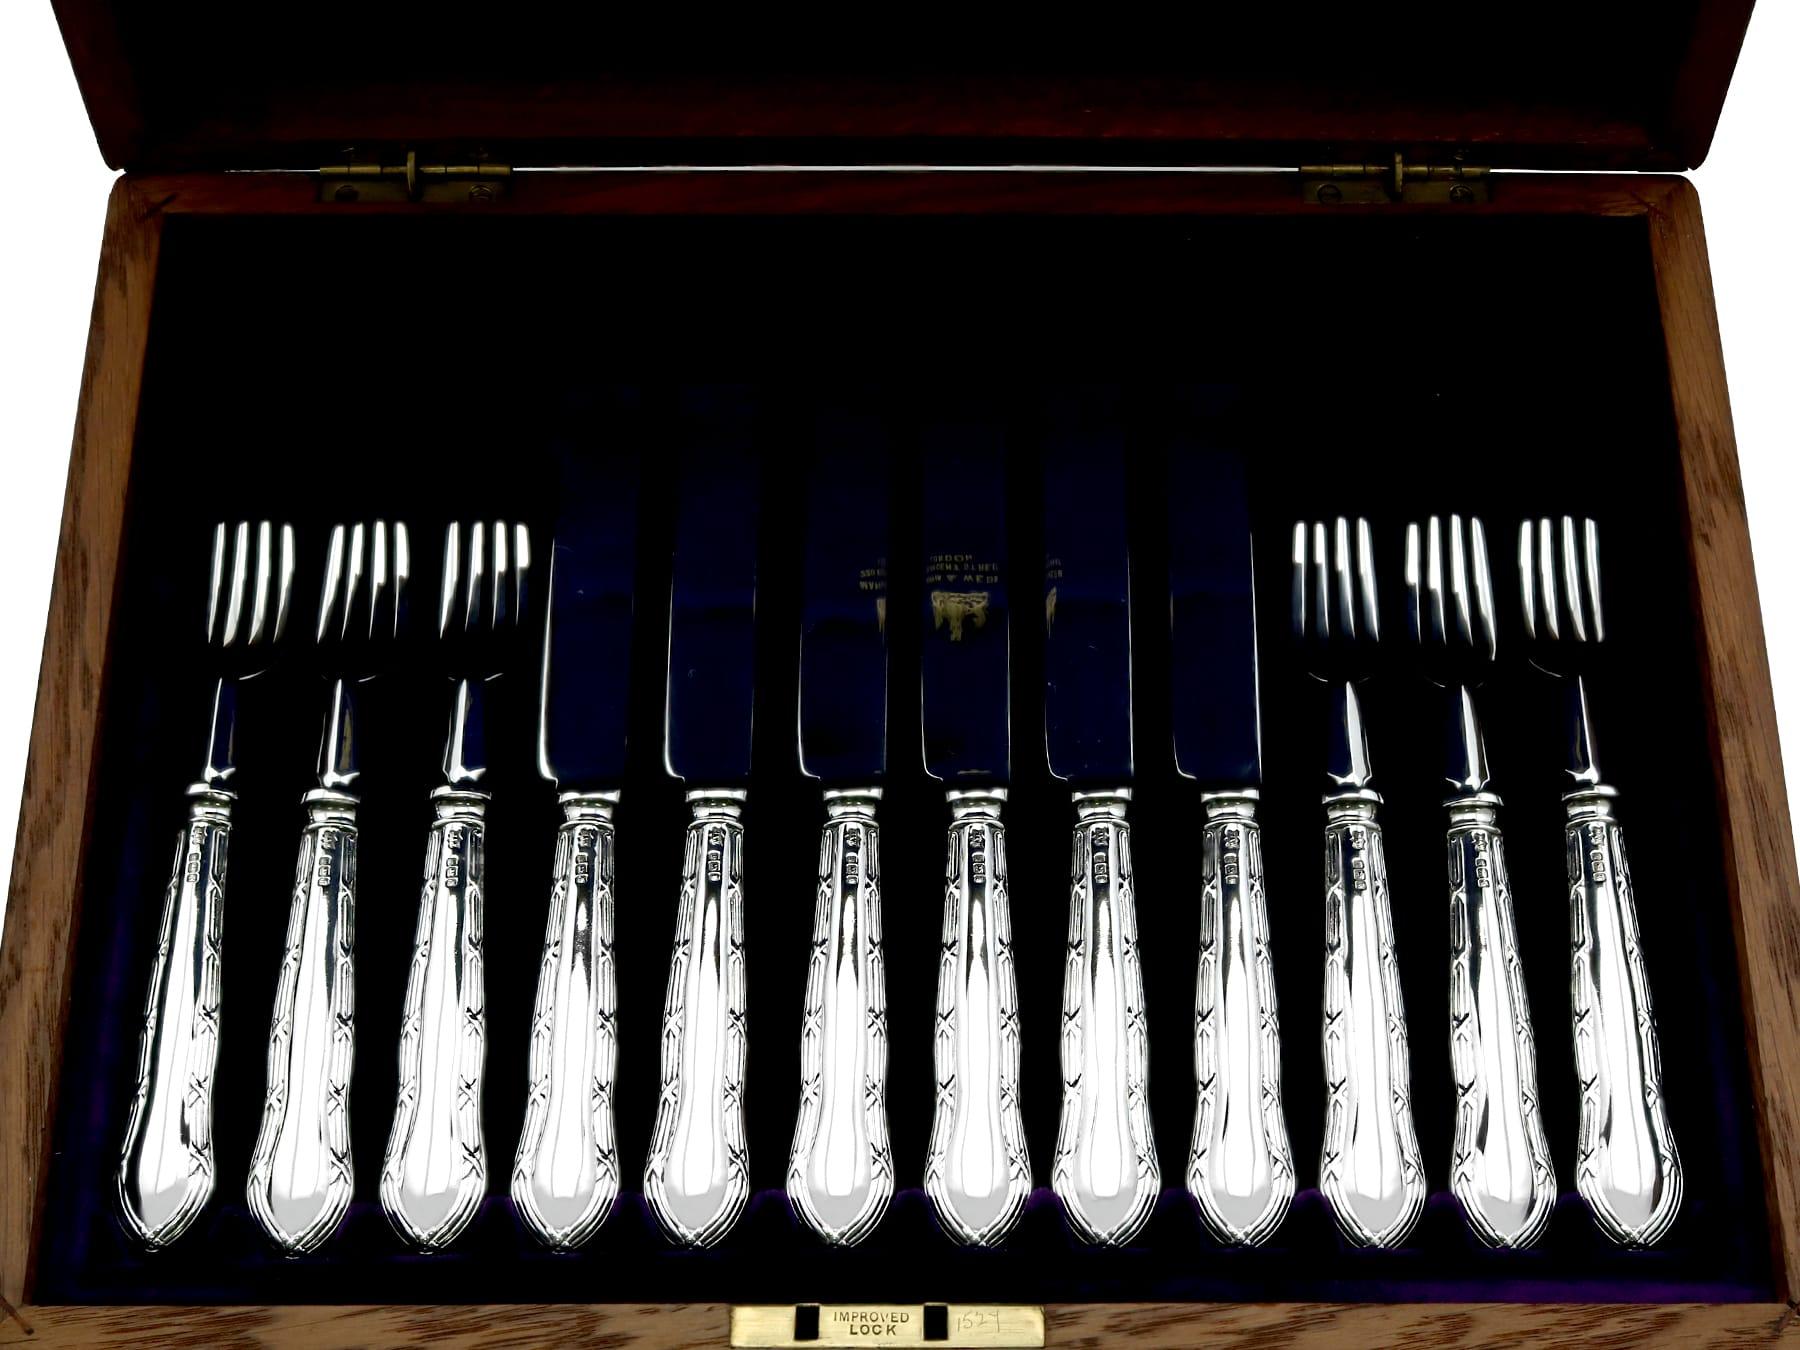 An exceptional, fine and impressive antique Edwardian English sterling silver Reed and Ribbon pattern fruit/dessert cutlery set for twelve persons made by Mappin & Webb Ltd - boxed; an addition to our dining silverware collection

This exceptional